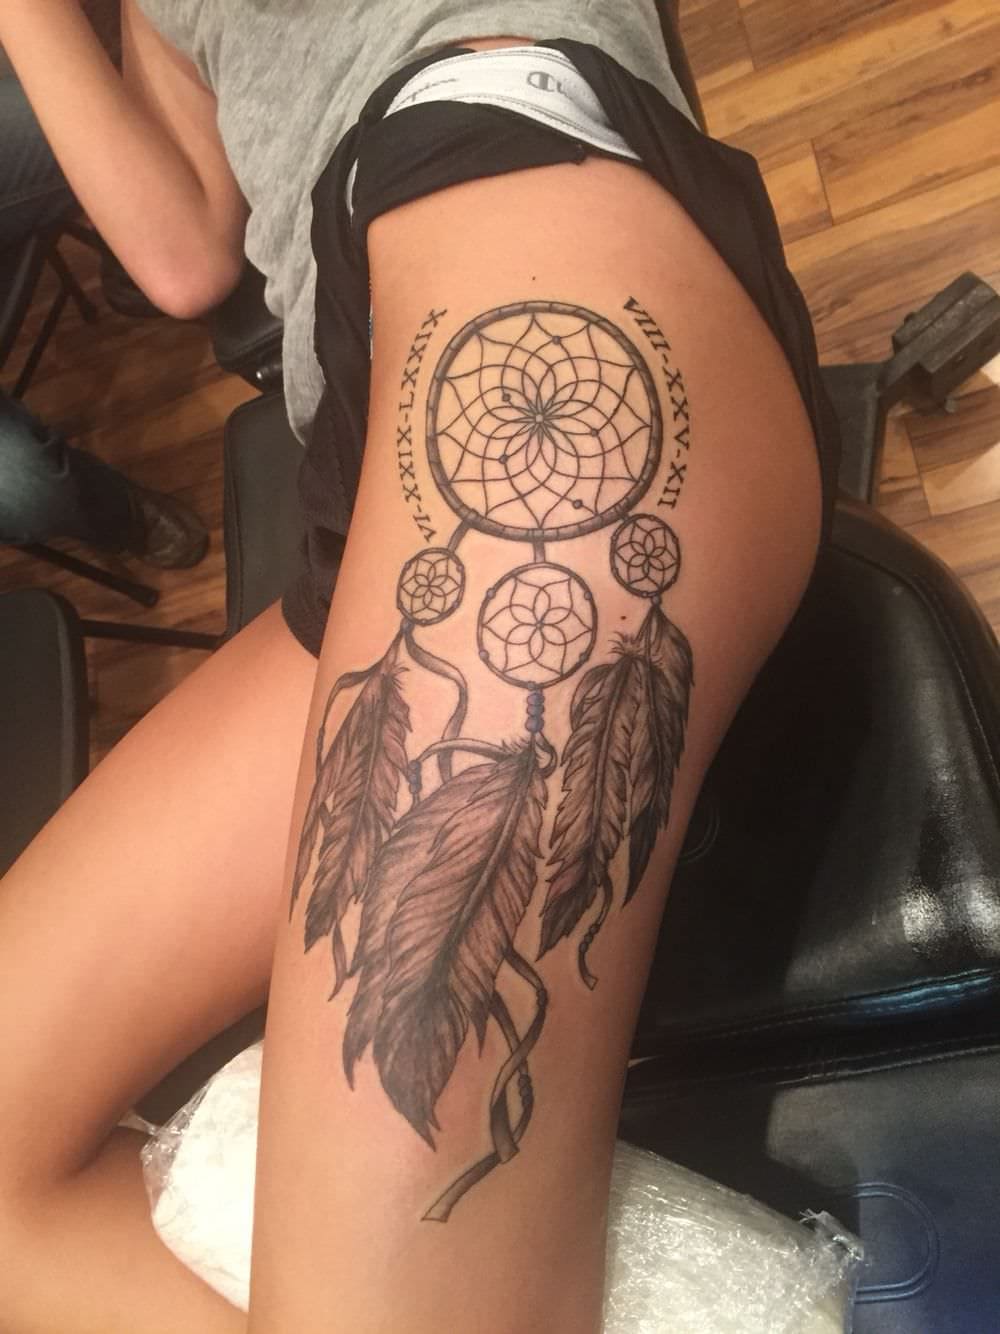 195 Thigh Tattoo Ideas to Flaunt Your Style - Wild Tattoo Art